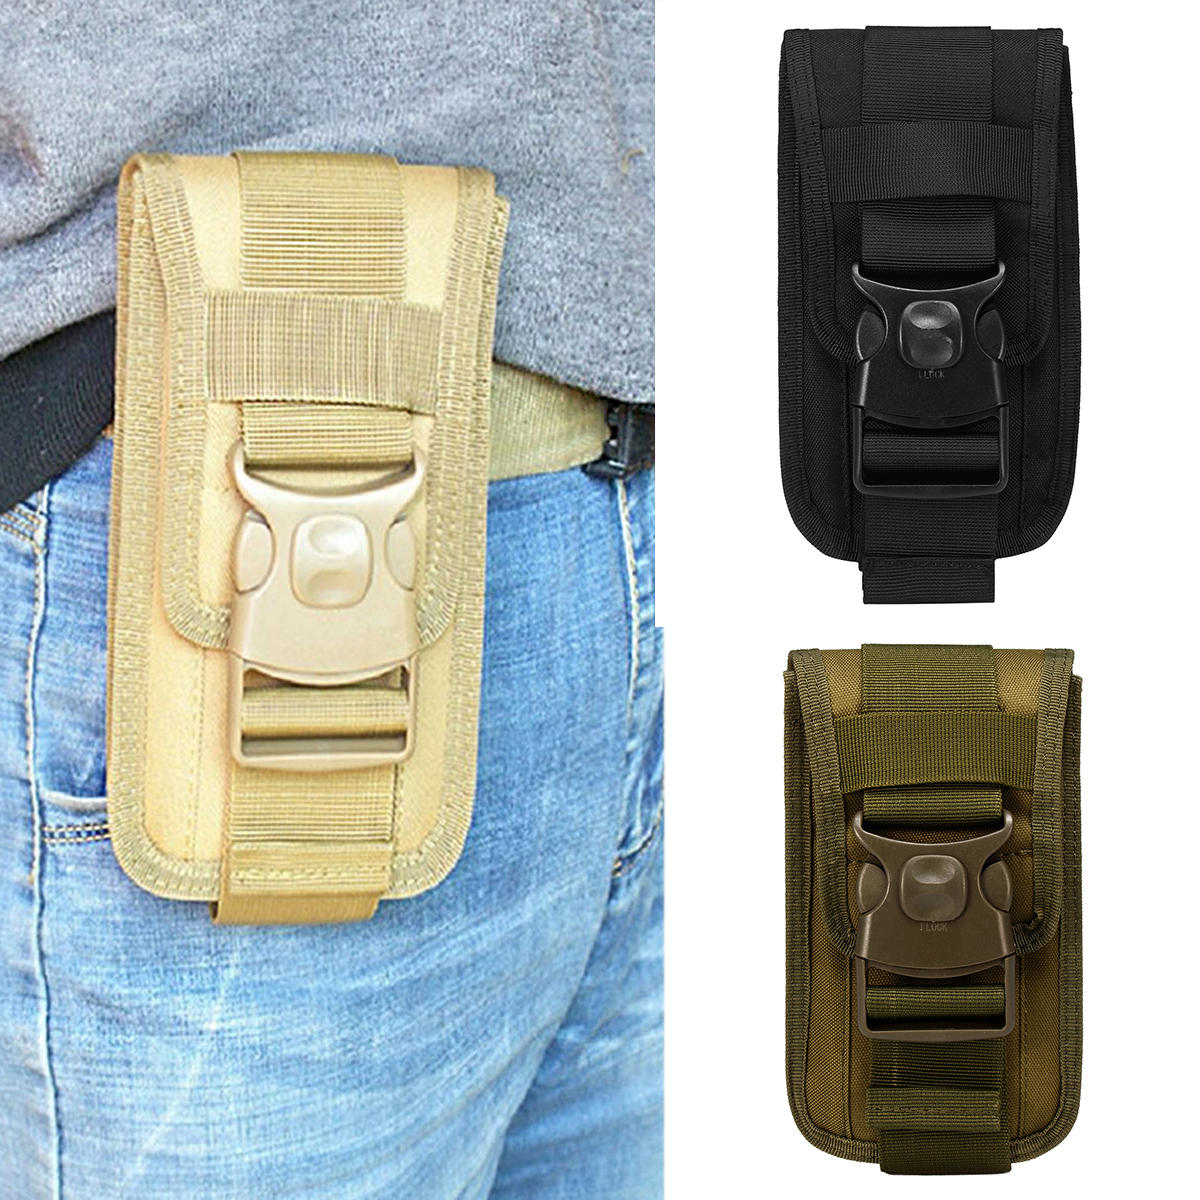 Outdoor Camping Tactical Cell Phone Bag Case Waist Pack Molle Belt Card Holder Pouch